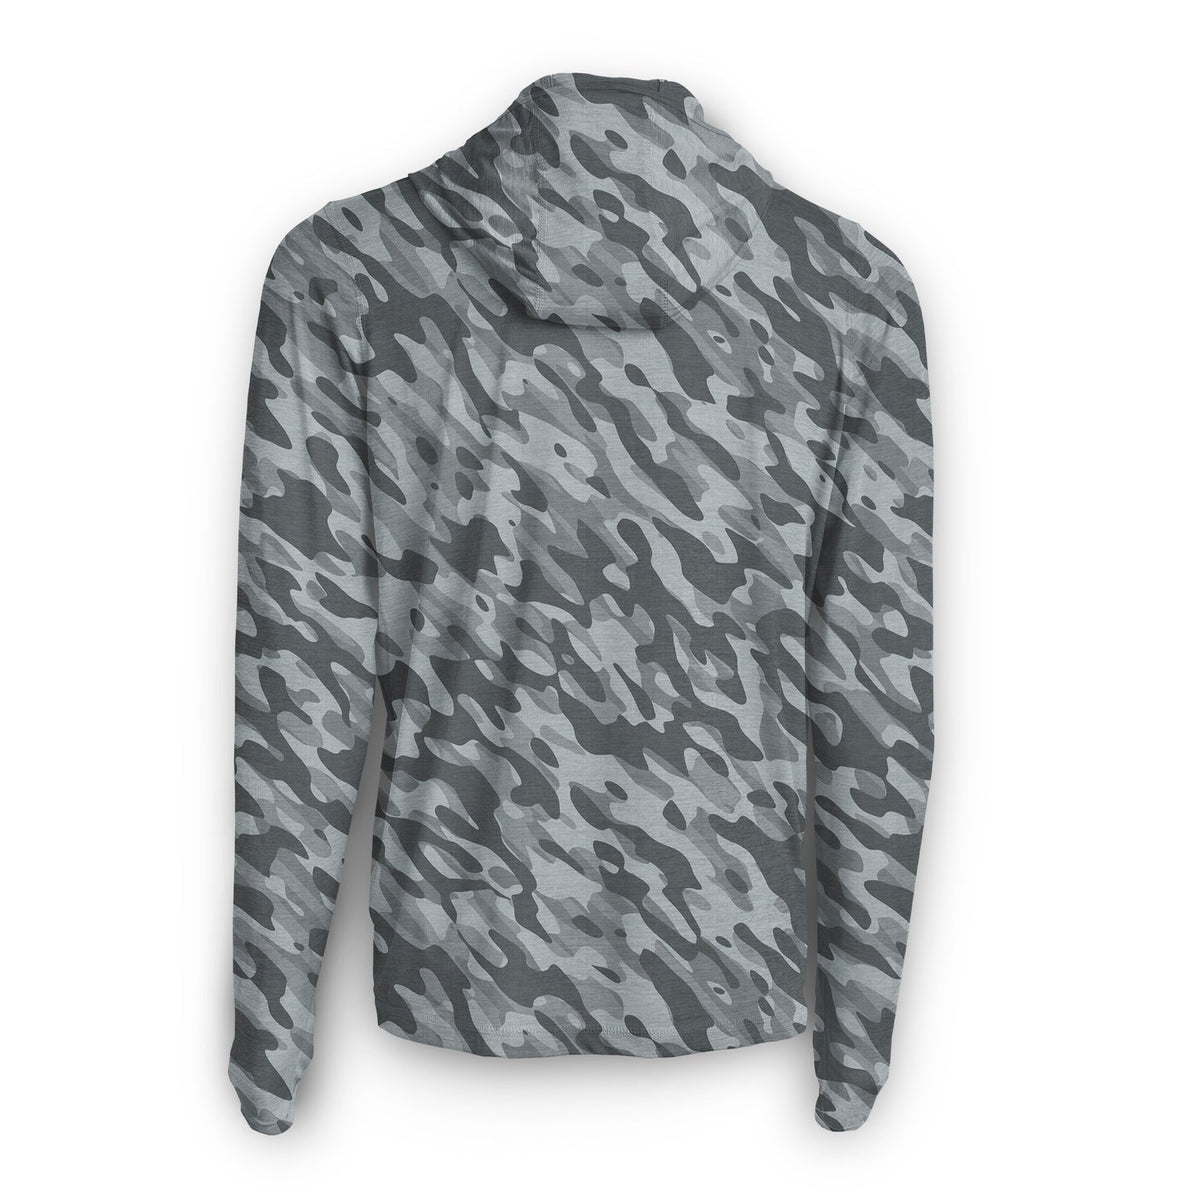 SCALES True Camo Active Performance Hooded Long Sleeve 